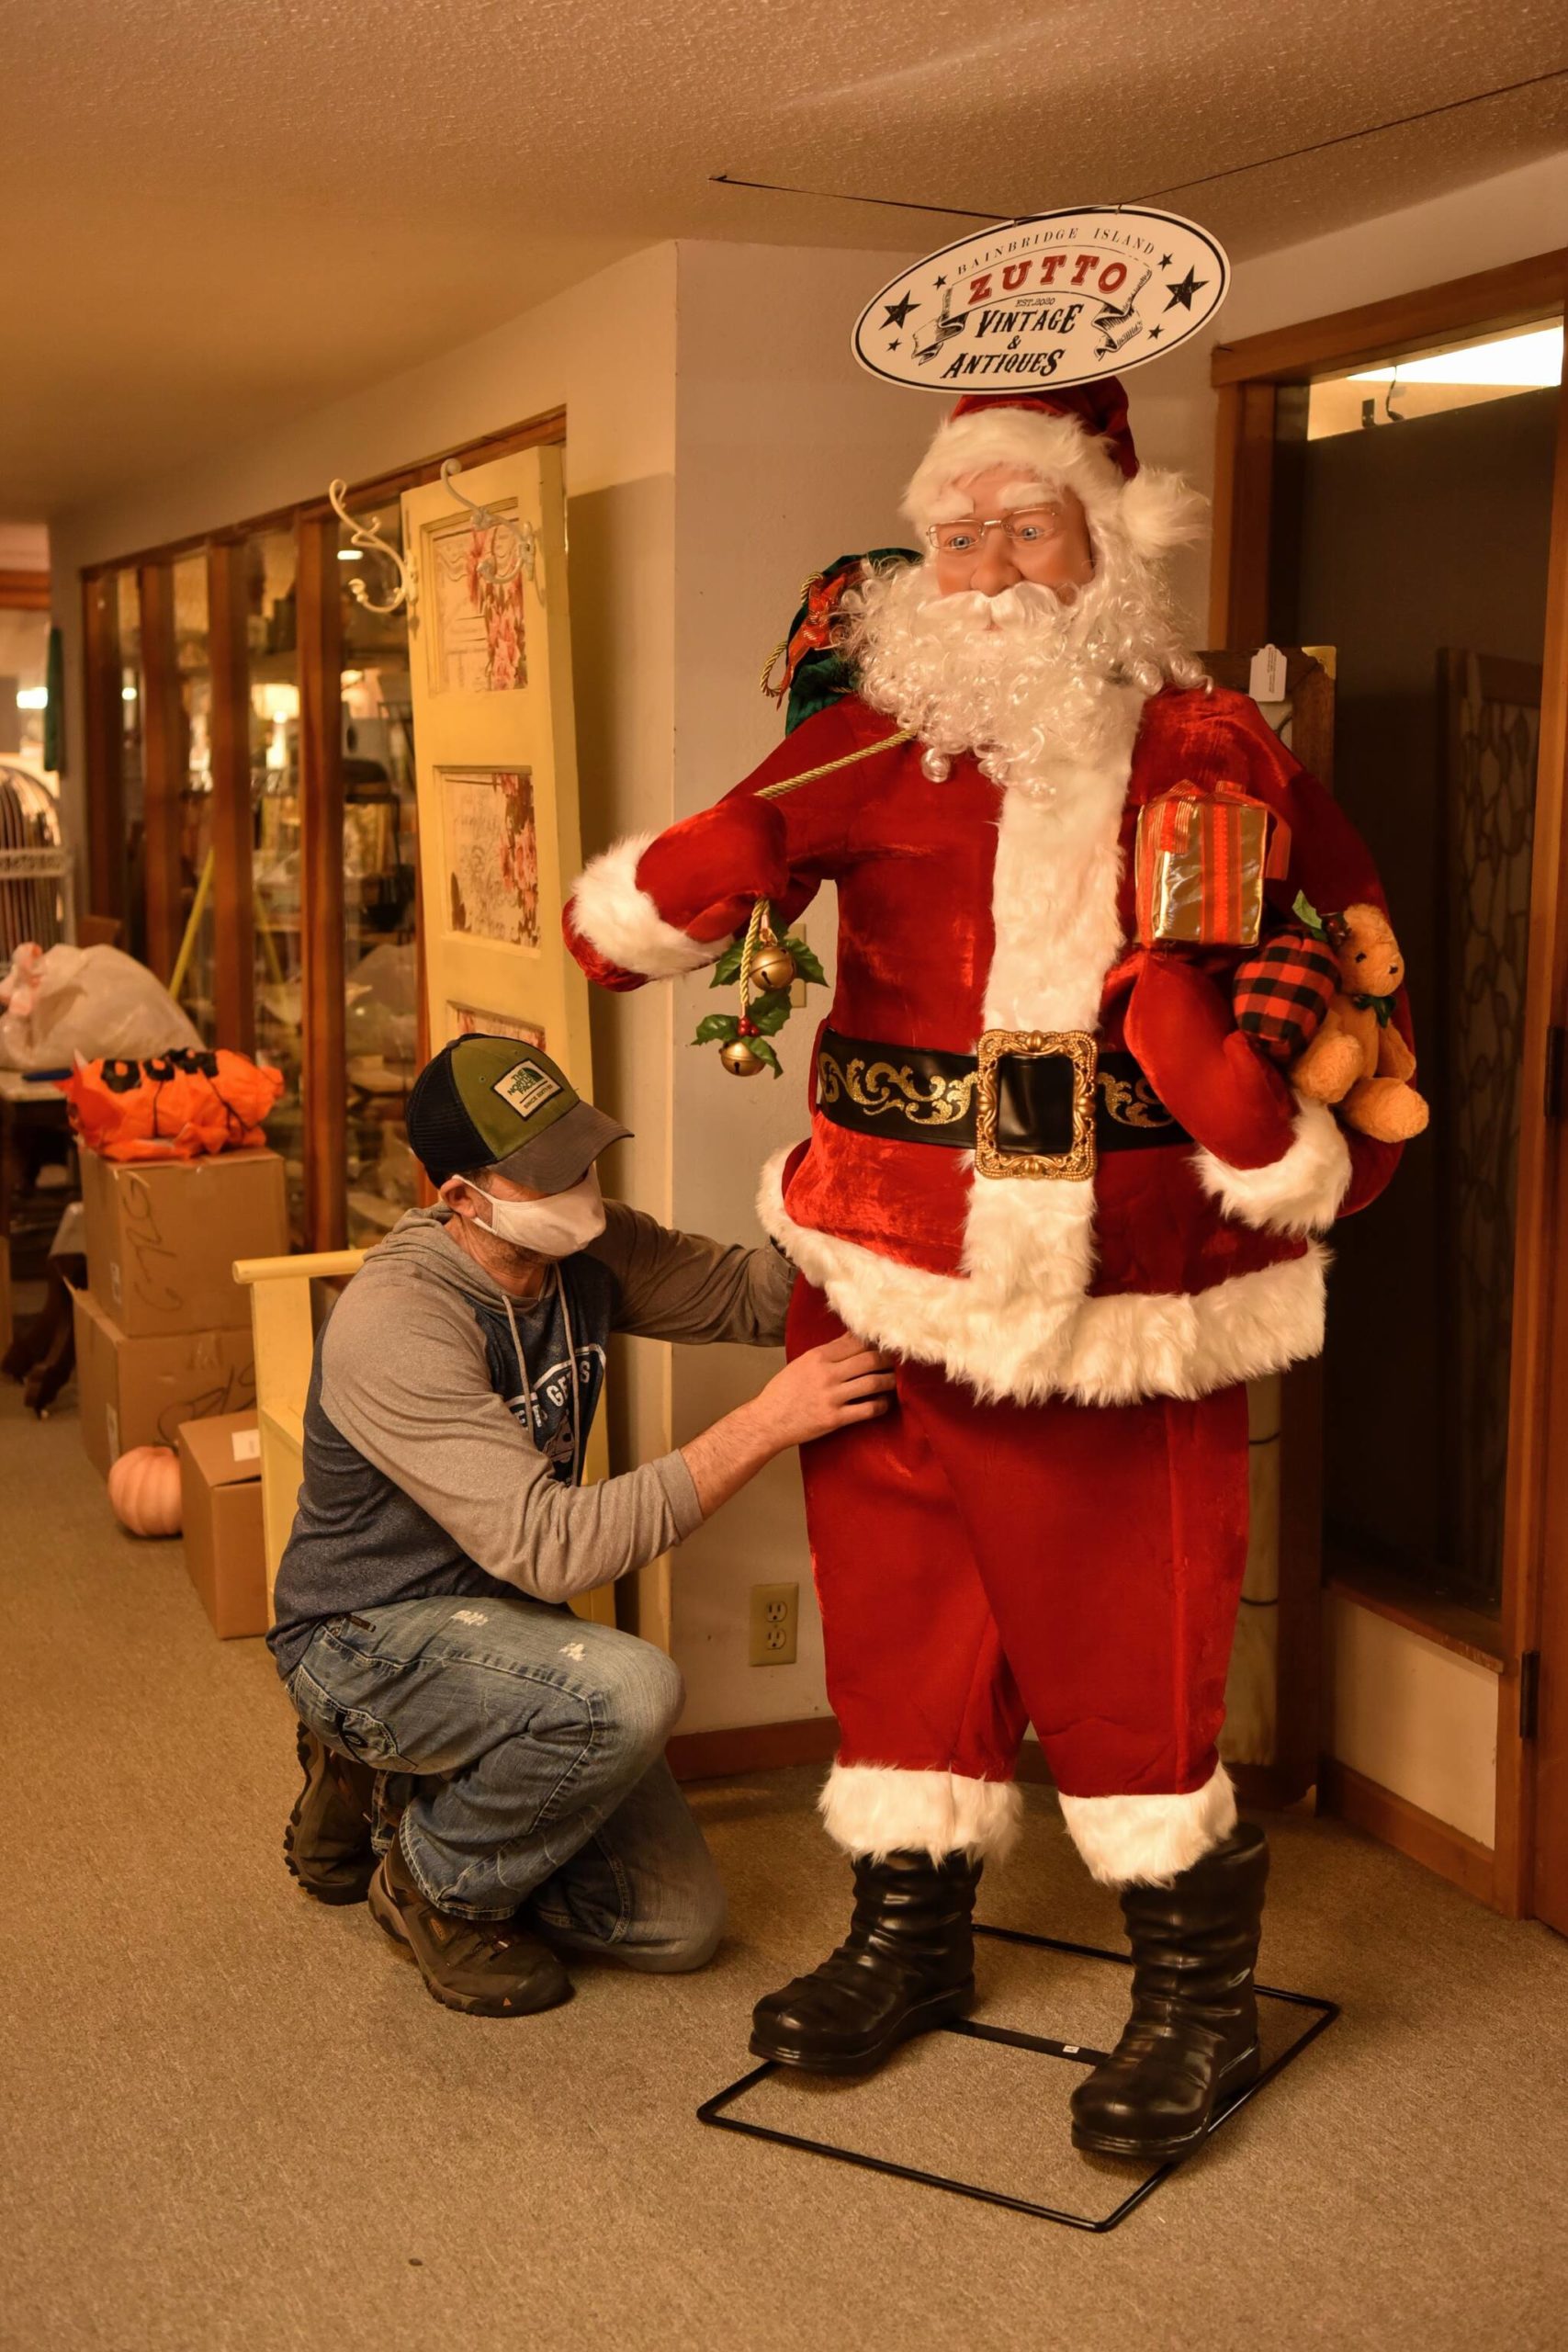 Zev Whitehead, co-owner of Zutto Vintage & Antiques located at 164 Bjune Dr SE in Winslow, readies a motion-controlled Santa to greet visitors at the store entrance.